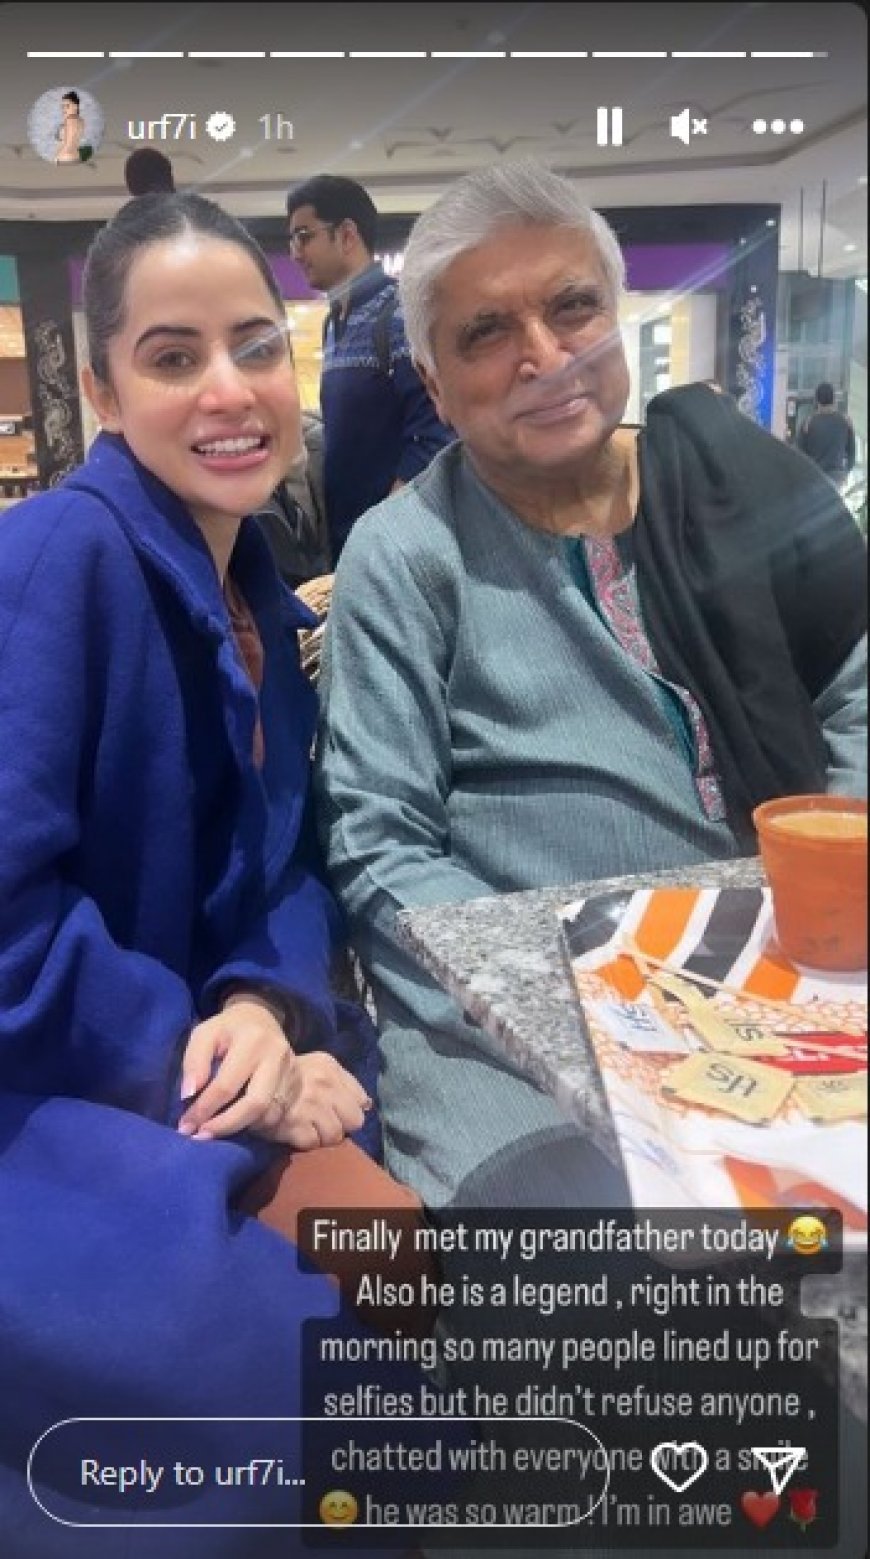 Urfi Javed was seen posing with Javed Akhtar, shared the picture and said - Finally met my grandfather...